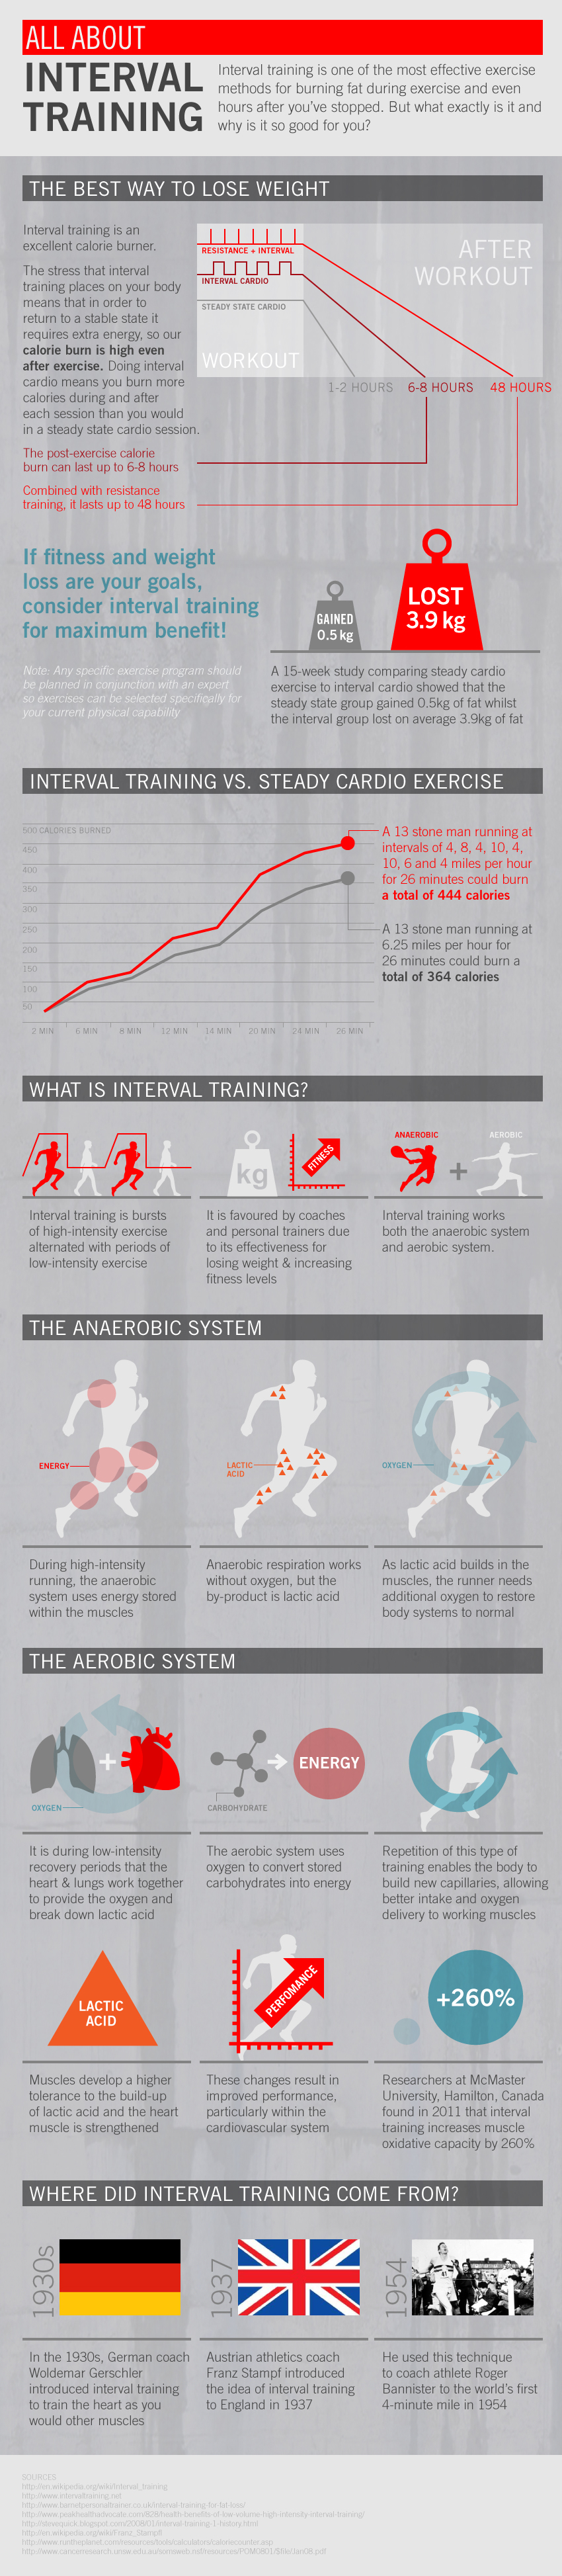 Interval Training Infographic